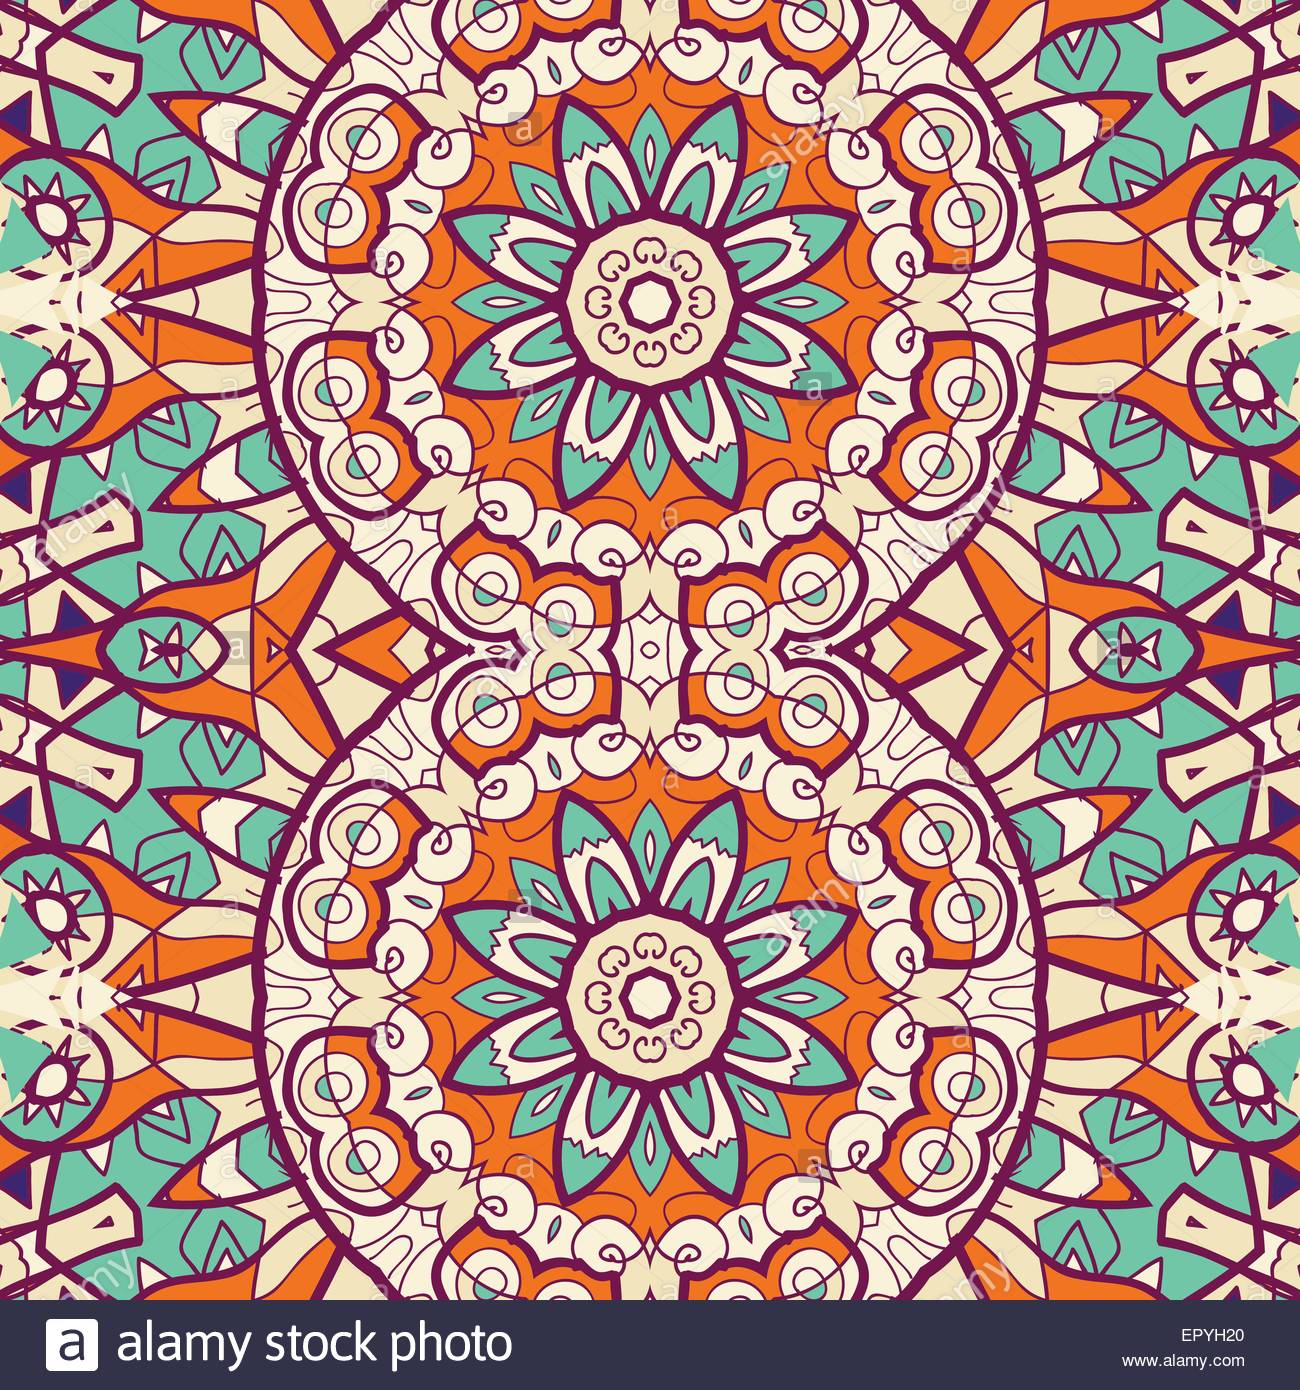 Ornametral Indian Bright Coloured Wallpaper Made Of Stylized